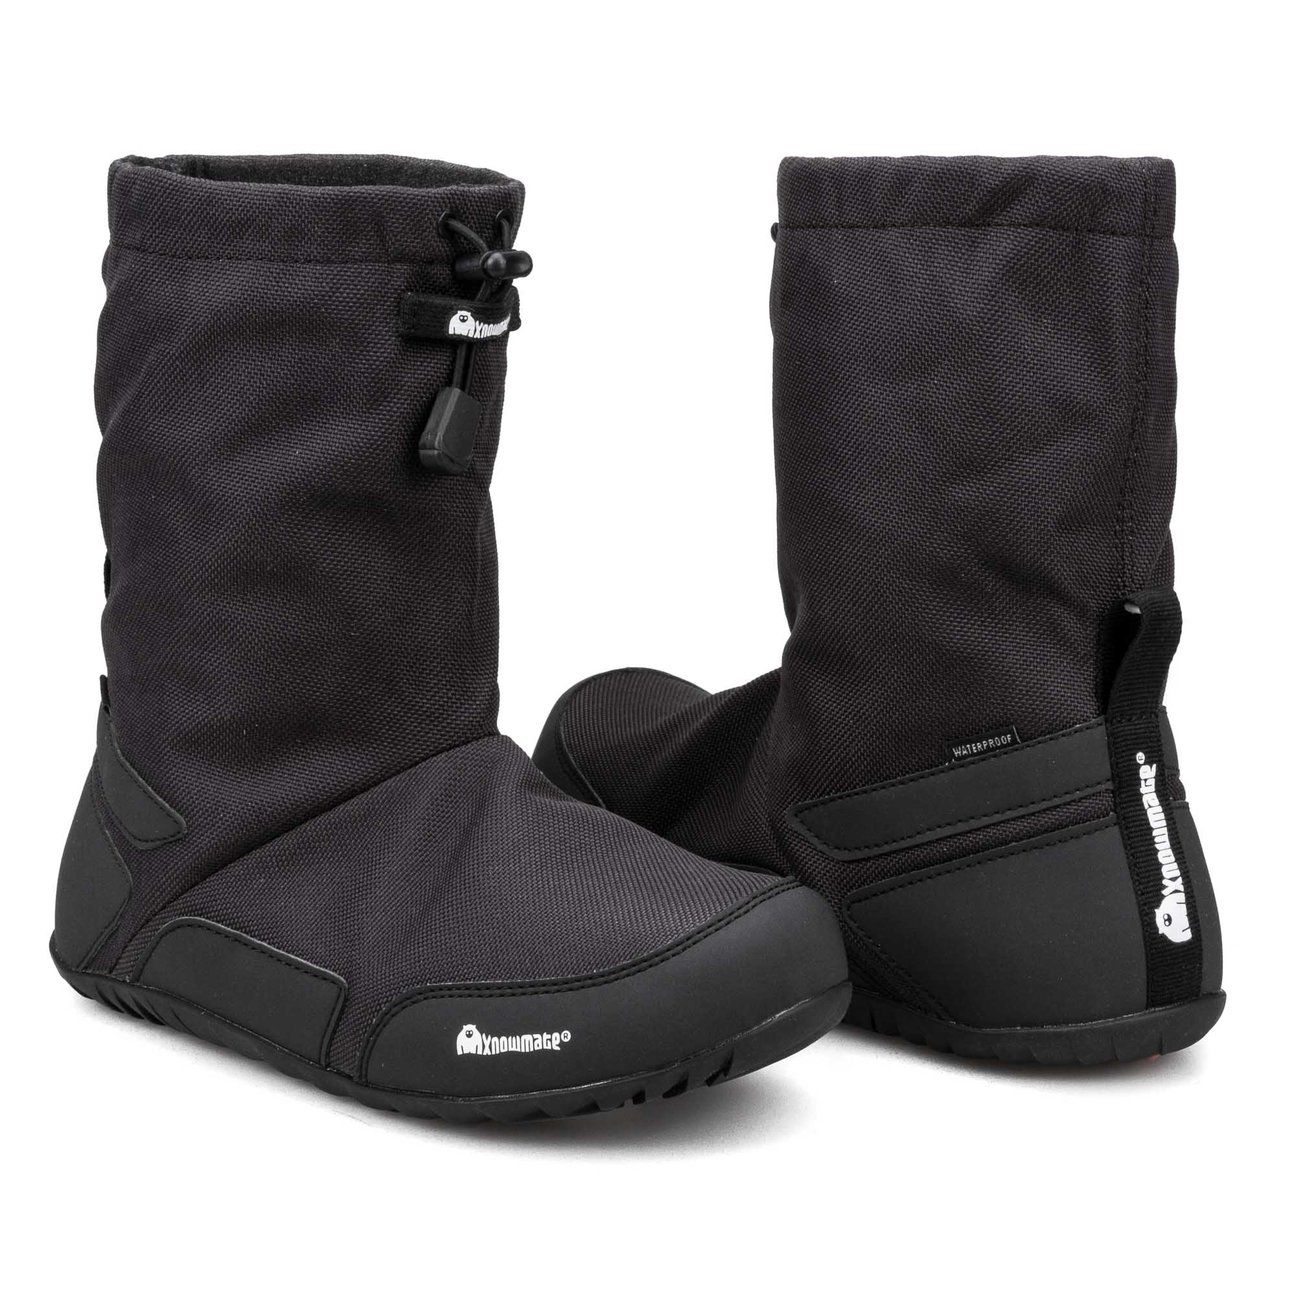 Xnowmate Boots Anthracite Black